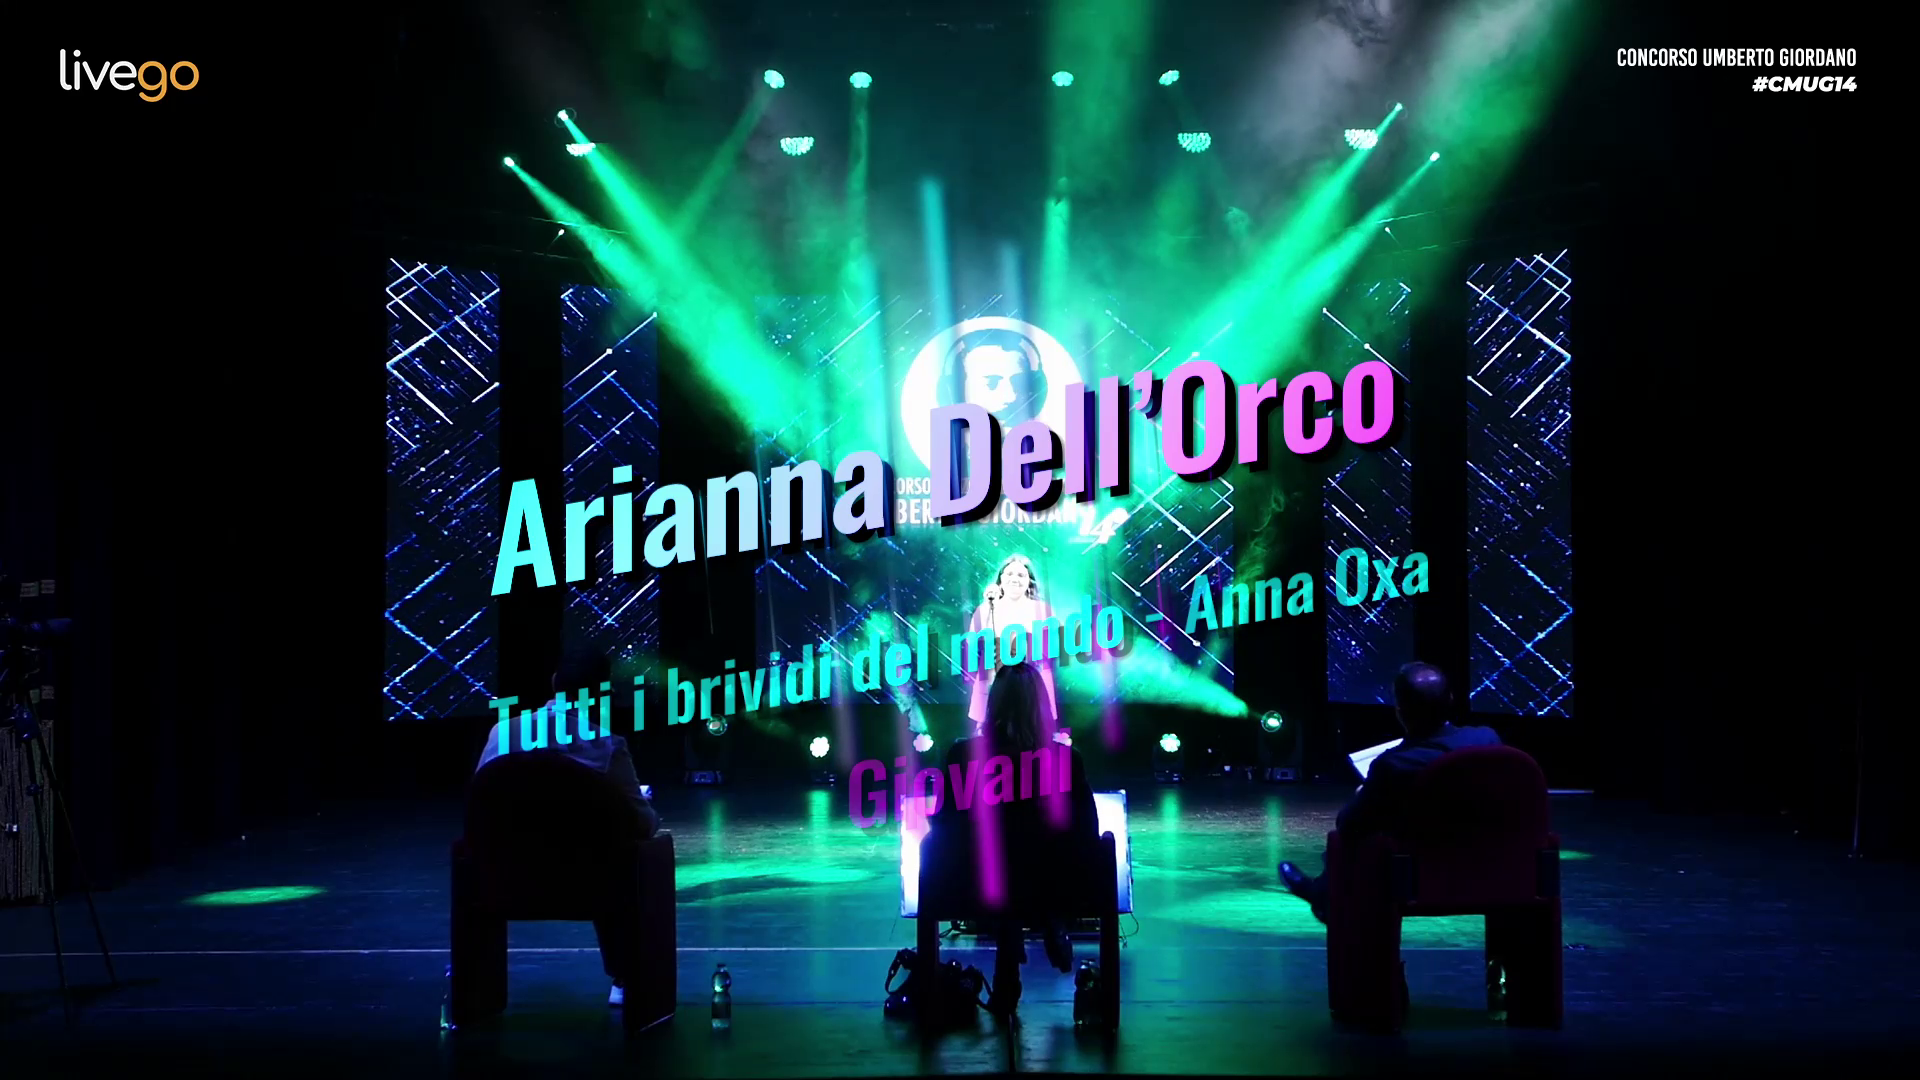 28 - Arianna Dell'Orco